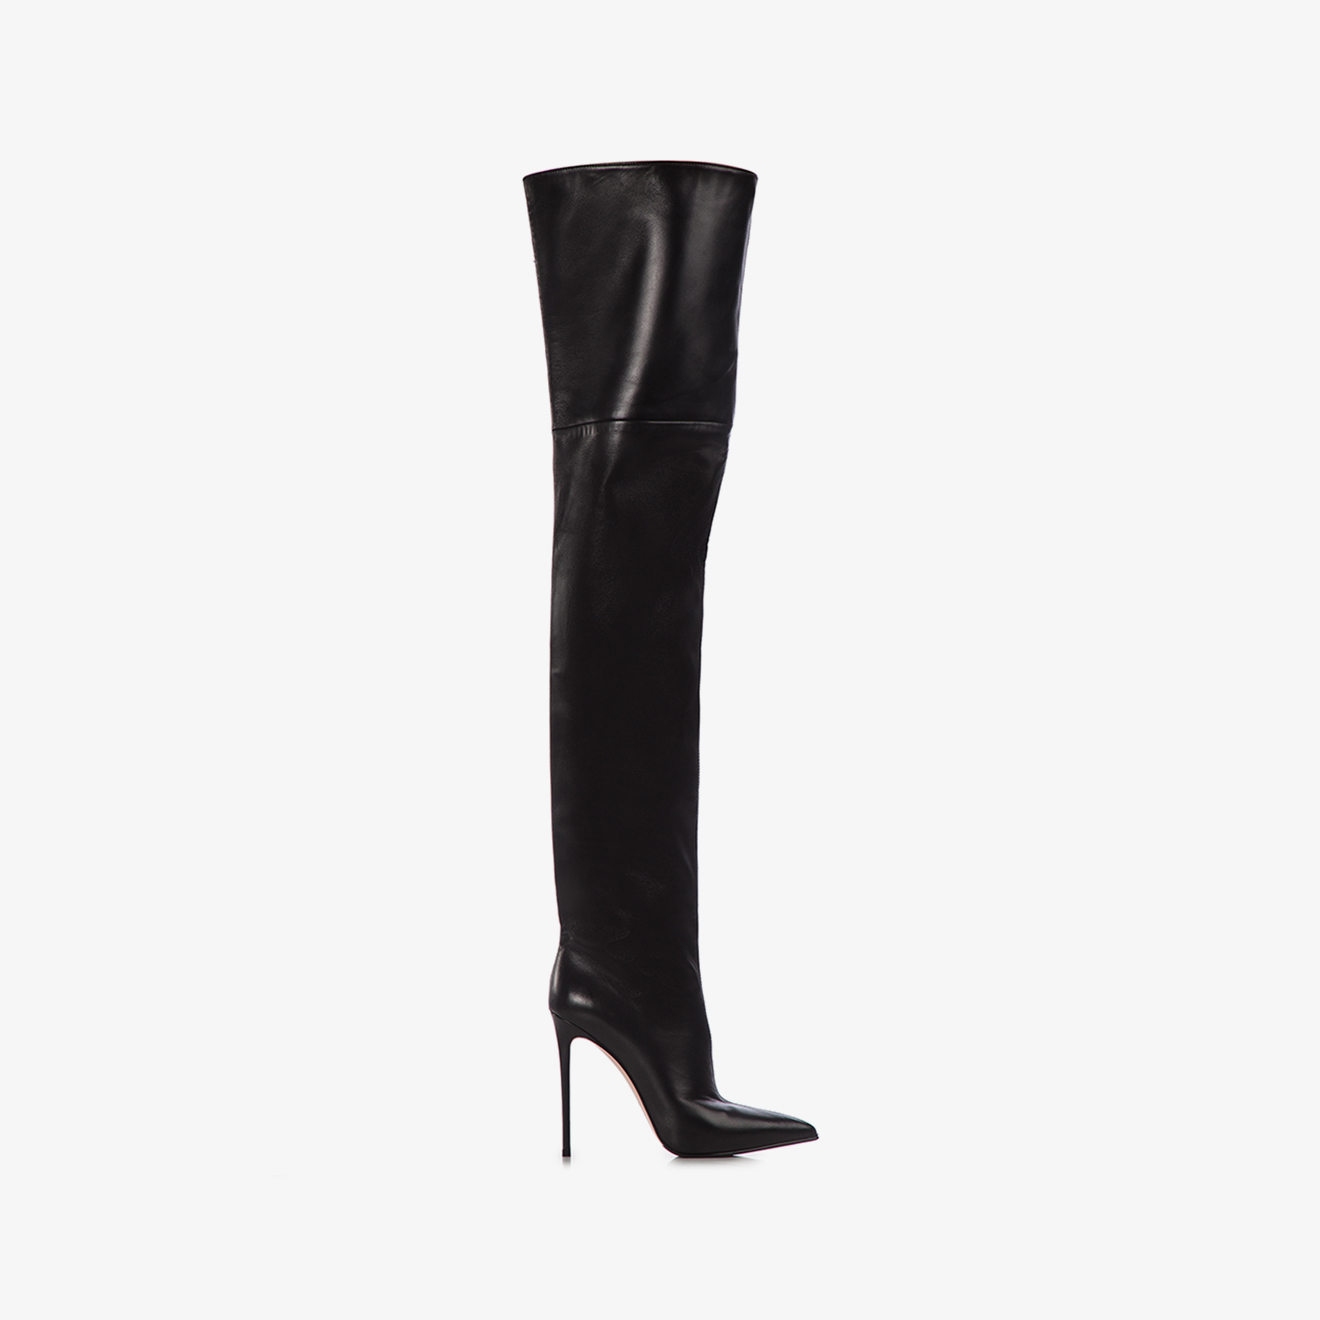 Black nappa leather oversized over-the-knee boot - Le Silla